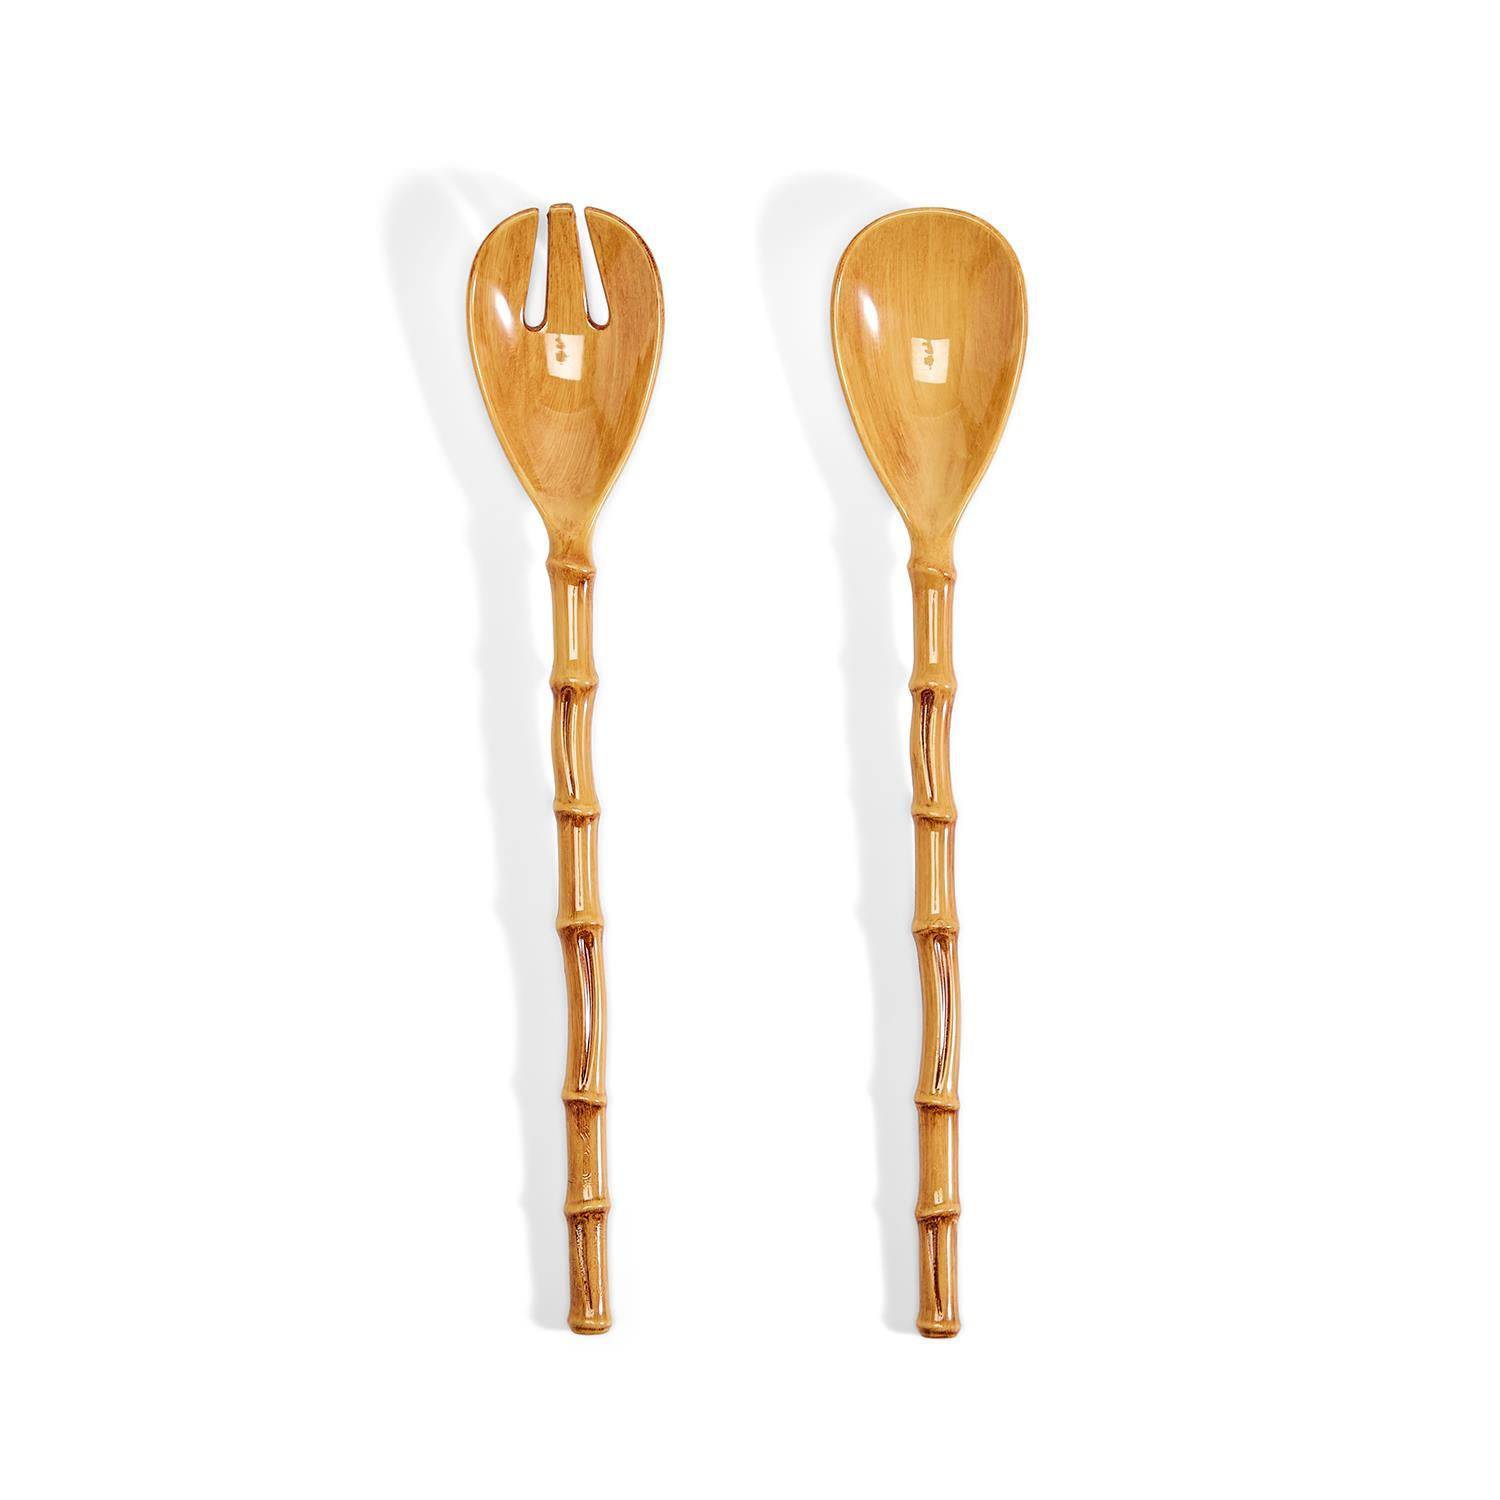 Set of 2 Bamboo Touch Accent Salad Servers (hand wash only) - 100% Melamine - The Preppy Bunny